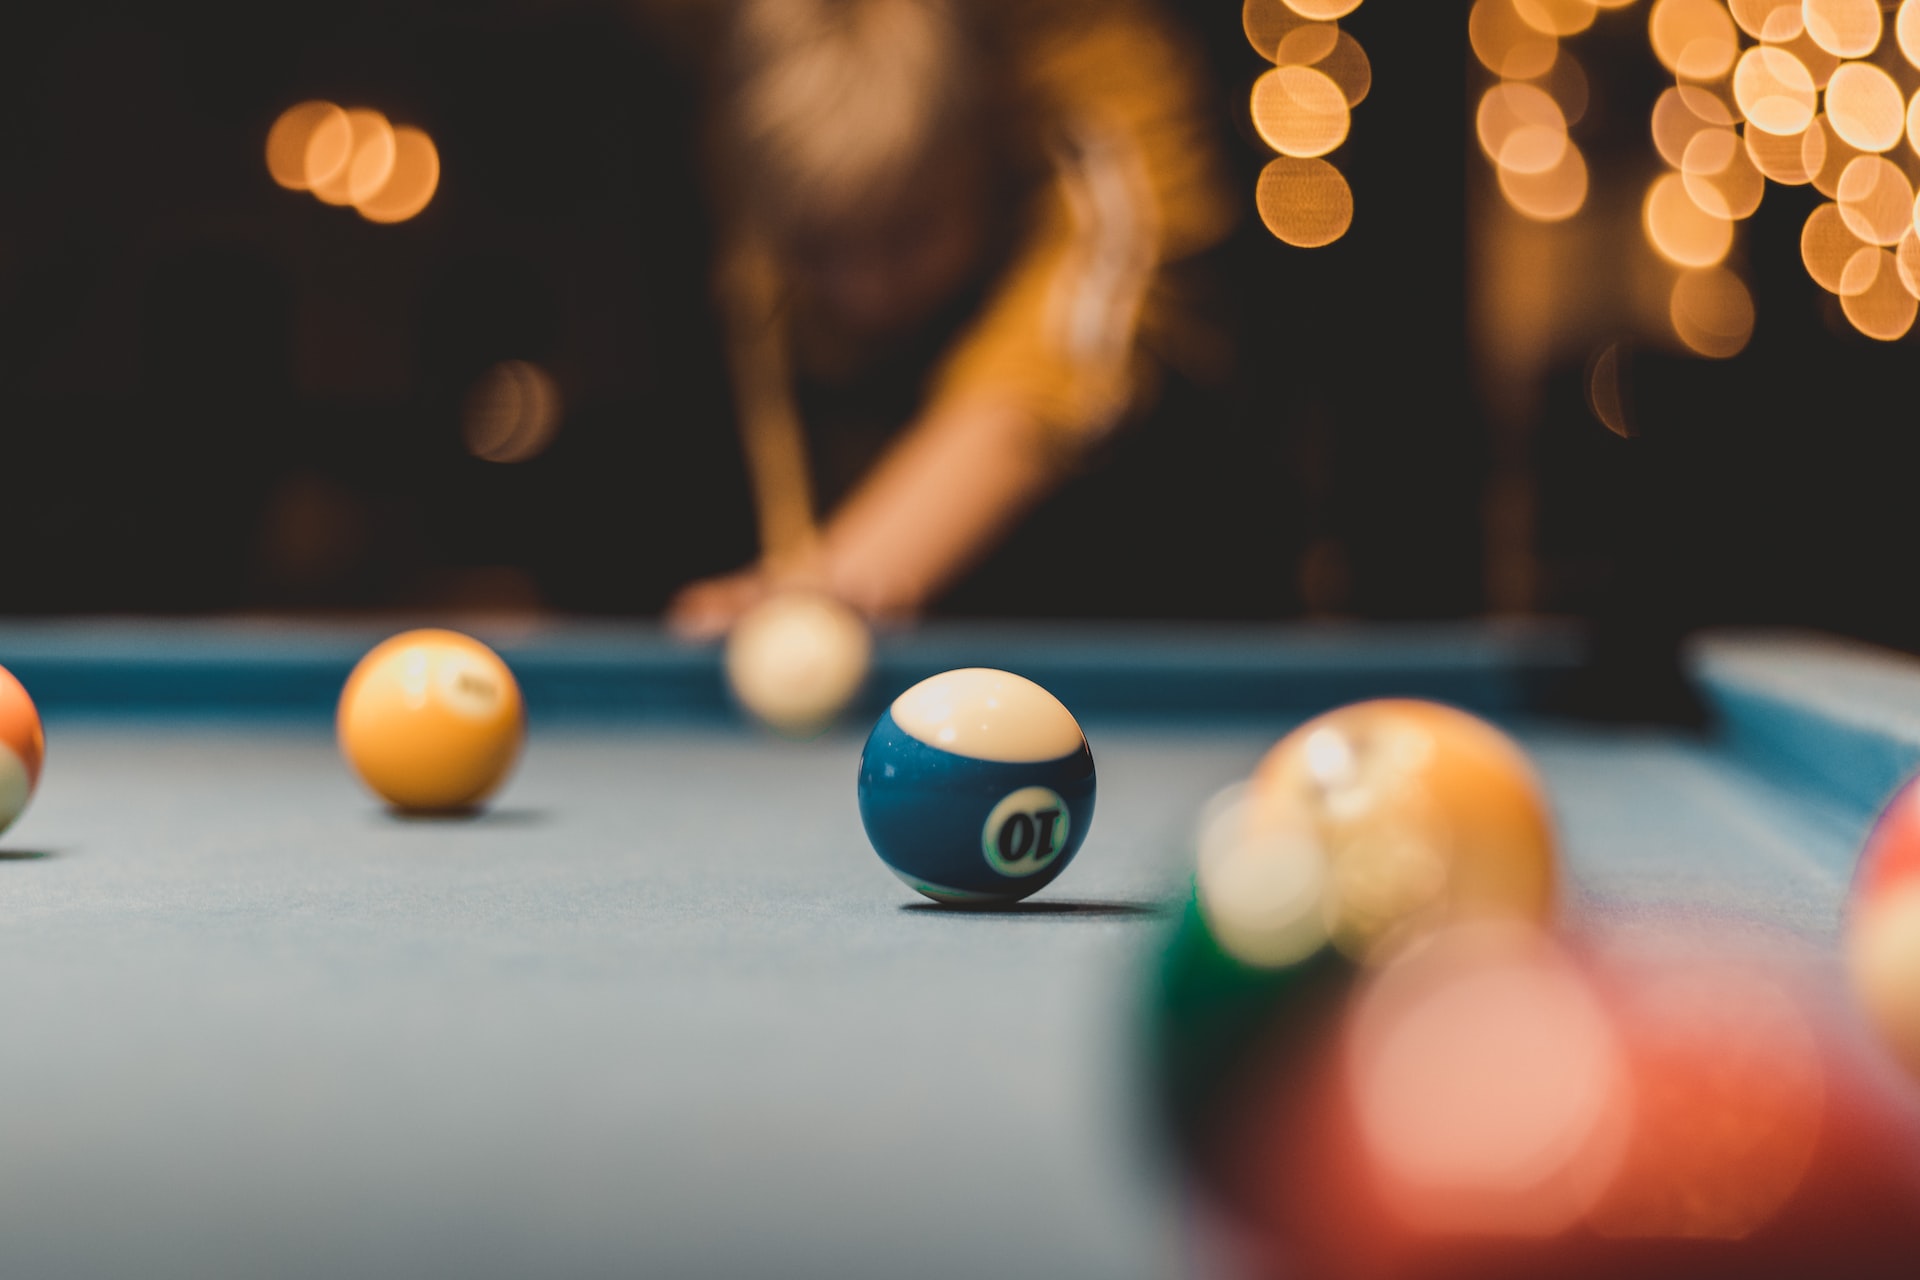 Basic Tips in Playing Billiards